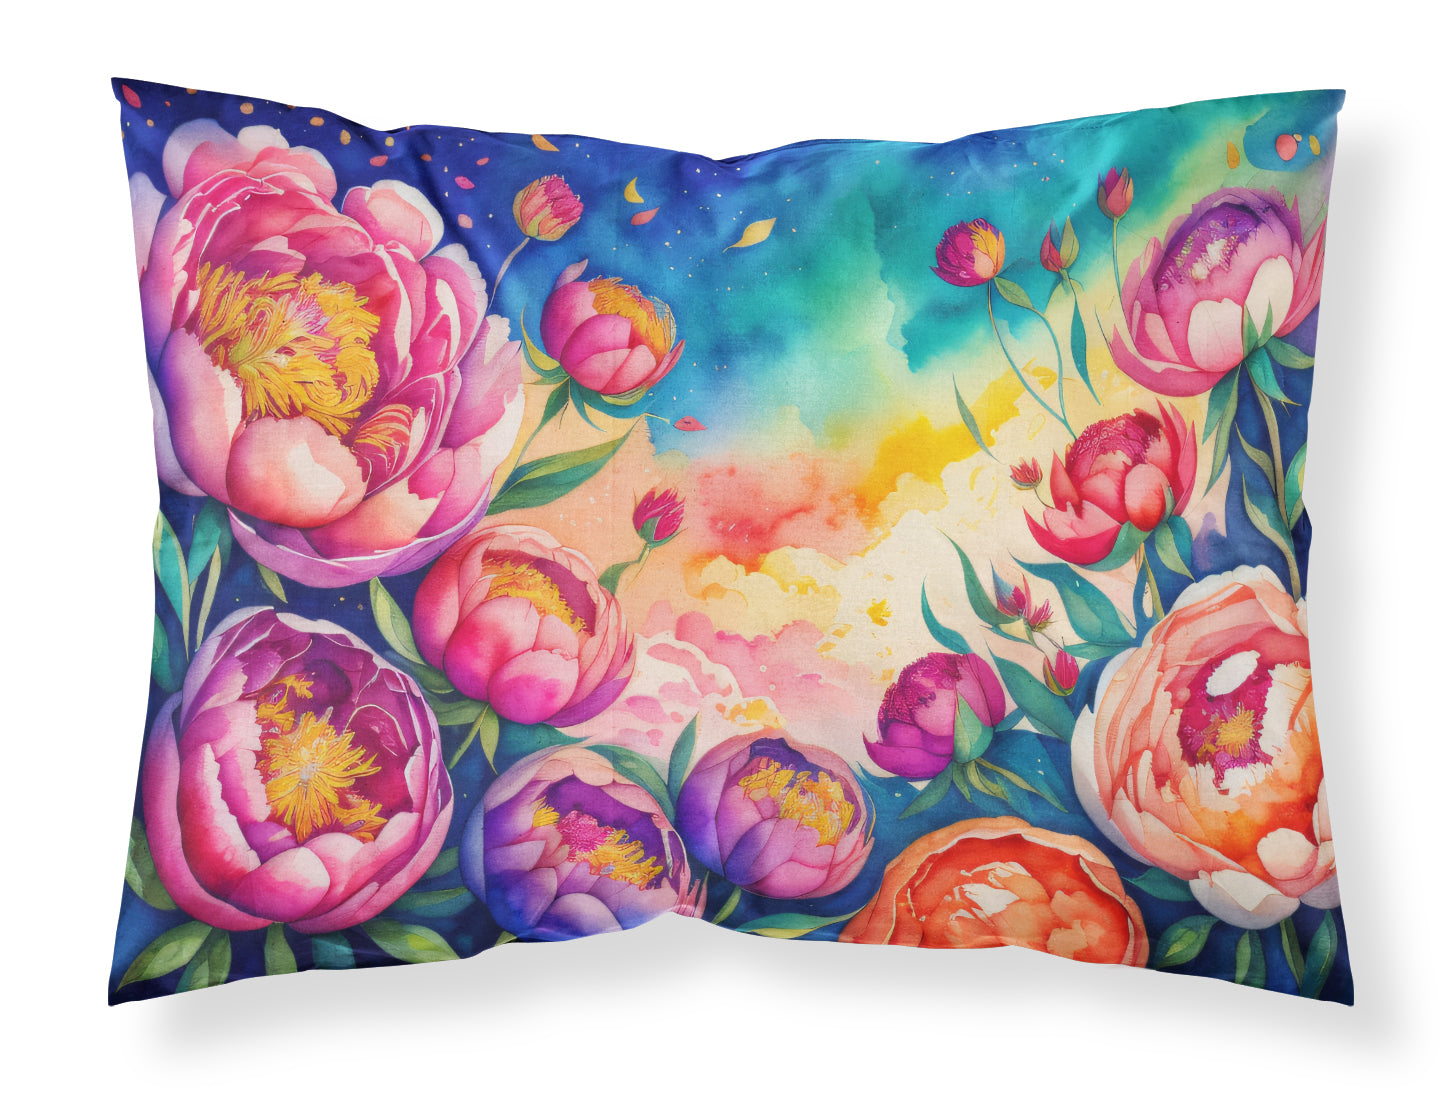 Buy this Peonies in Color Fabric Standard Pillowcase